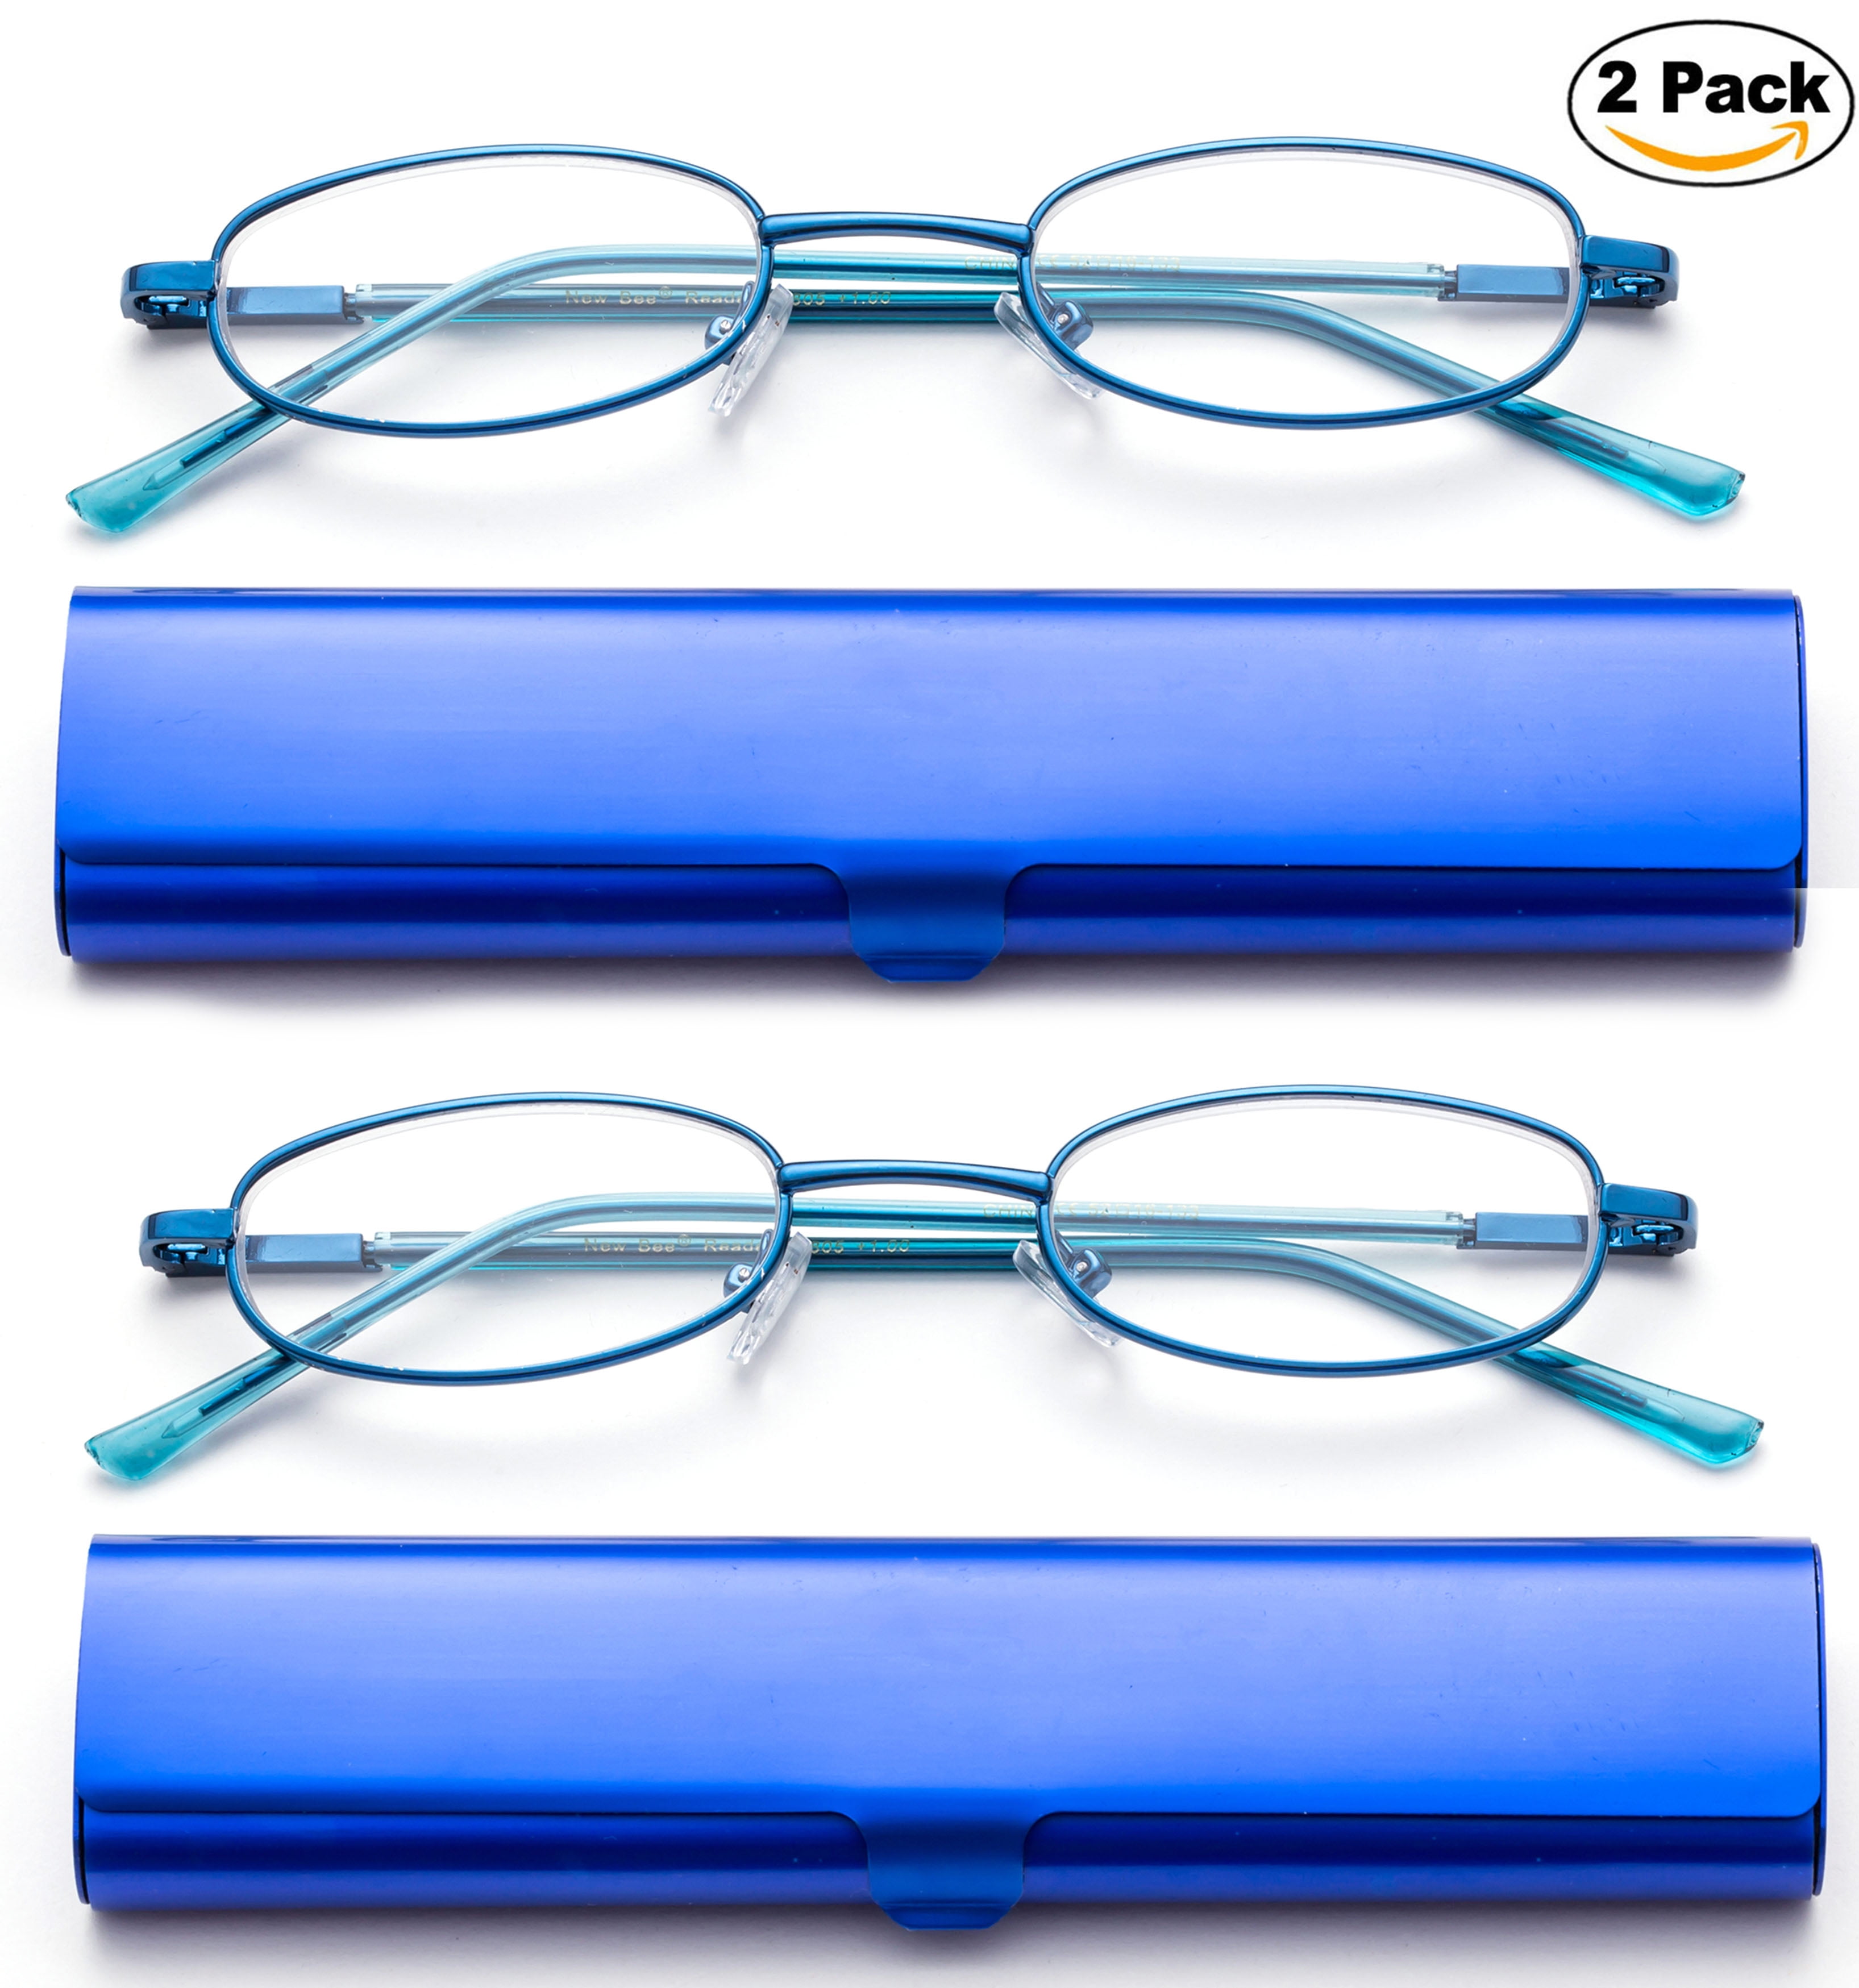 Newbee Fashion Portable Compact Reading Glasses In Aluminum Case Metal Oval Shaped Reading